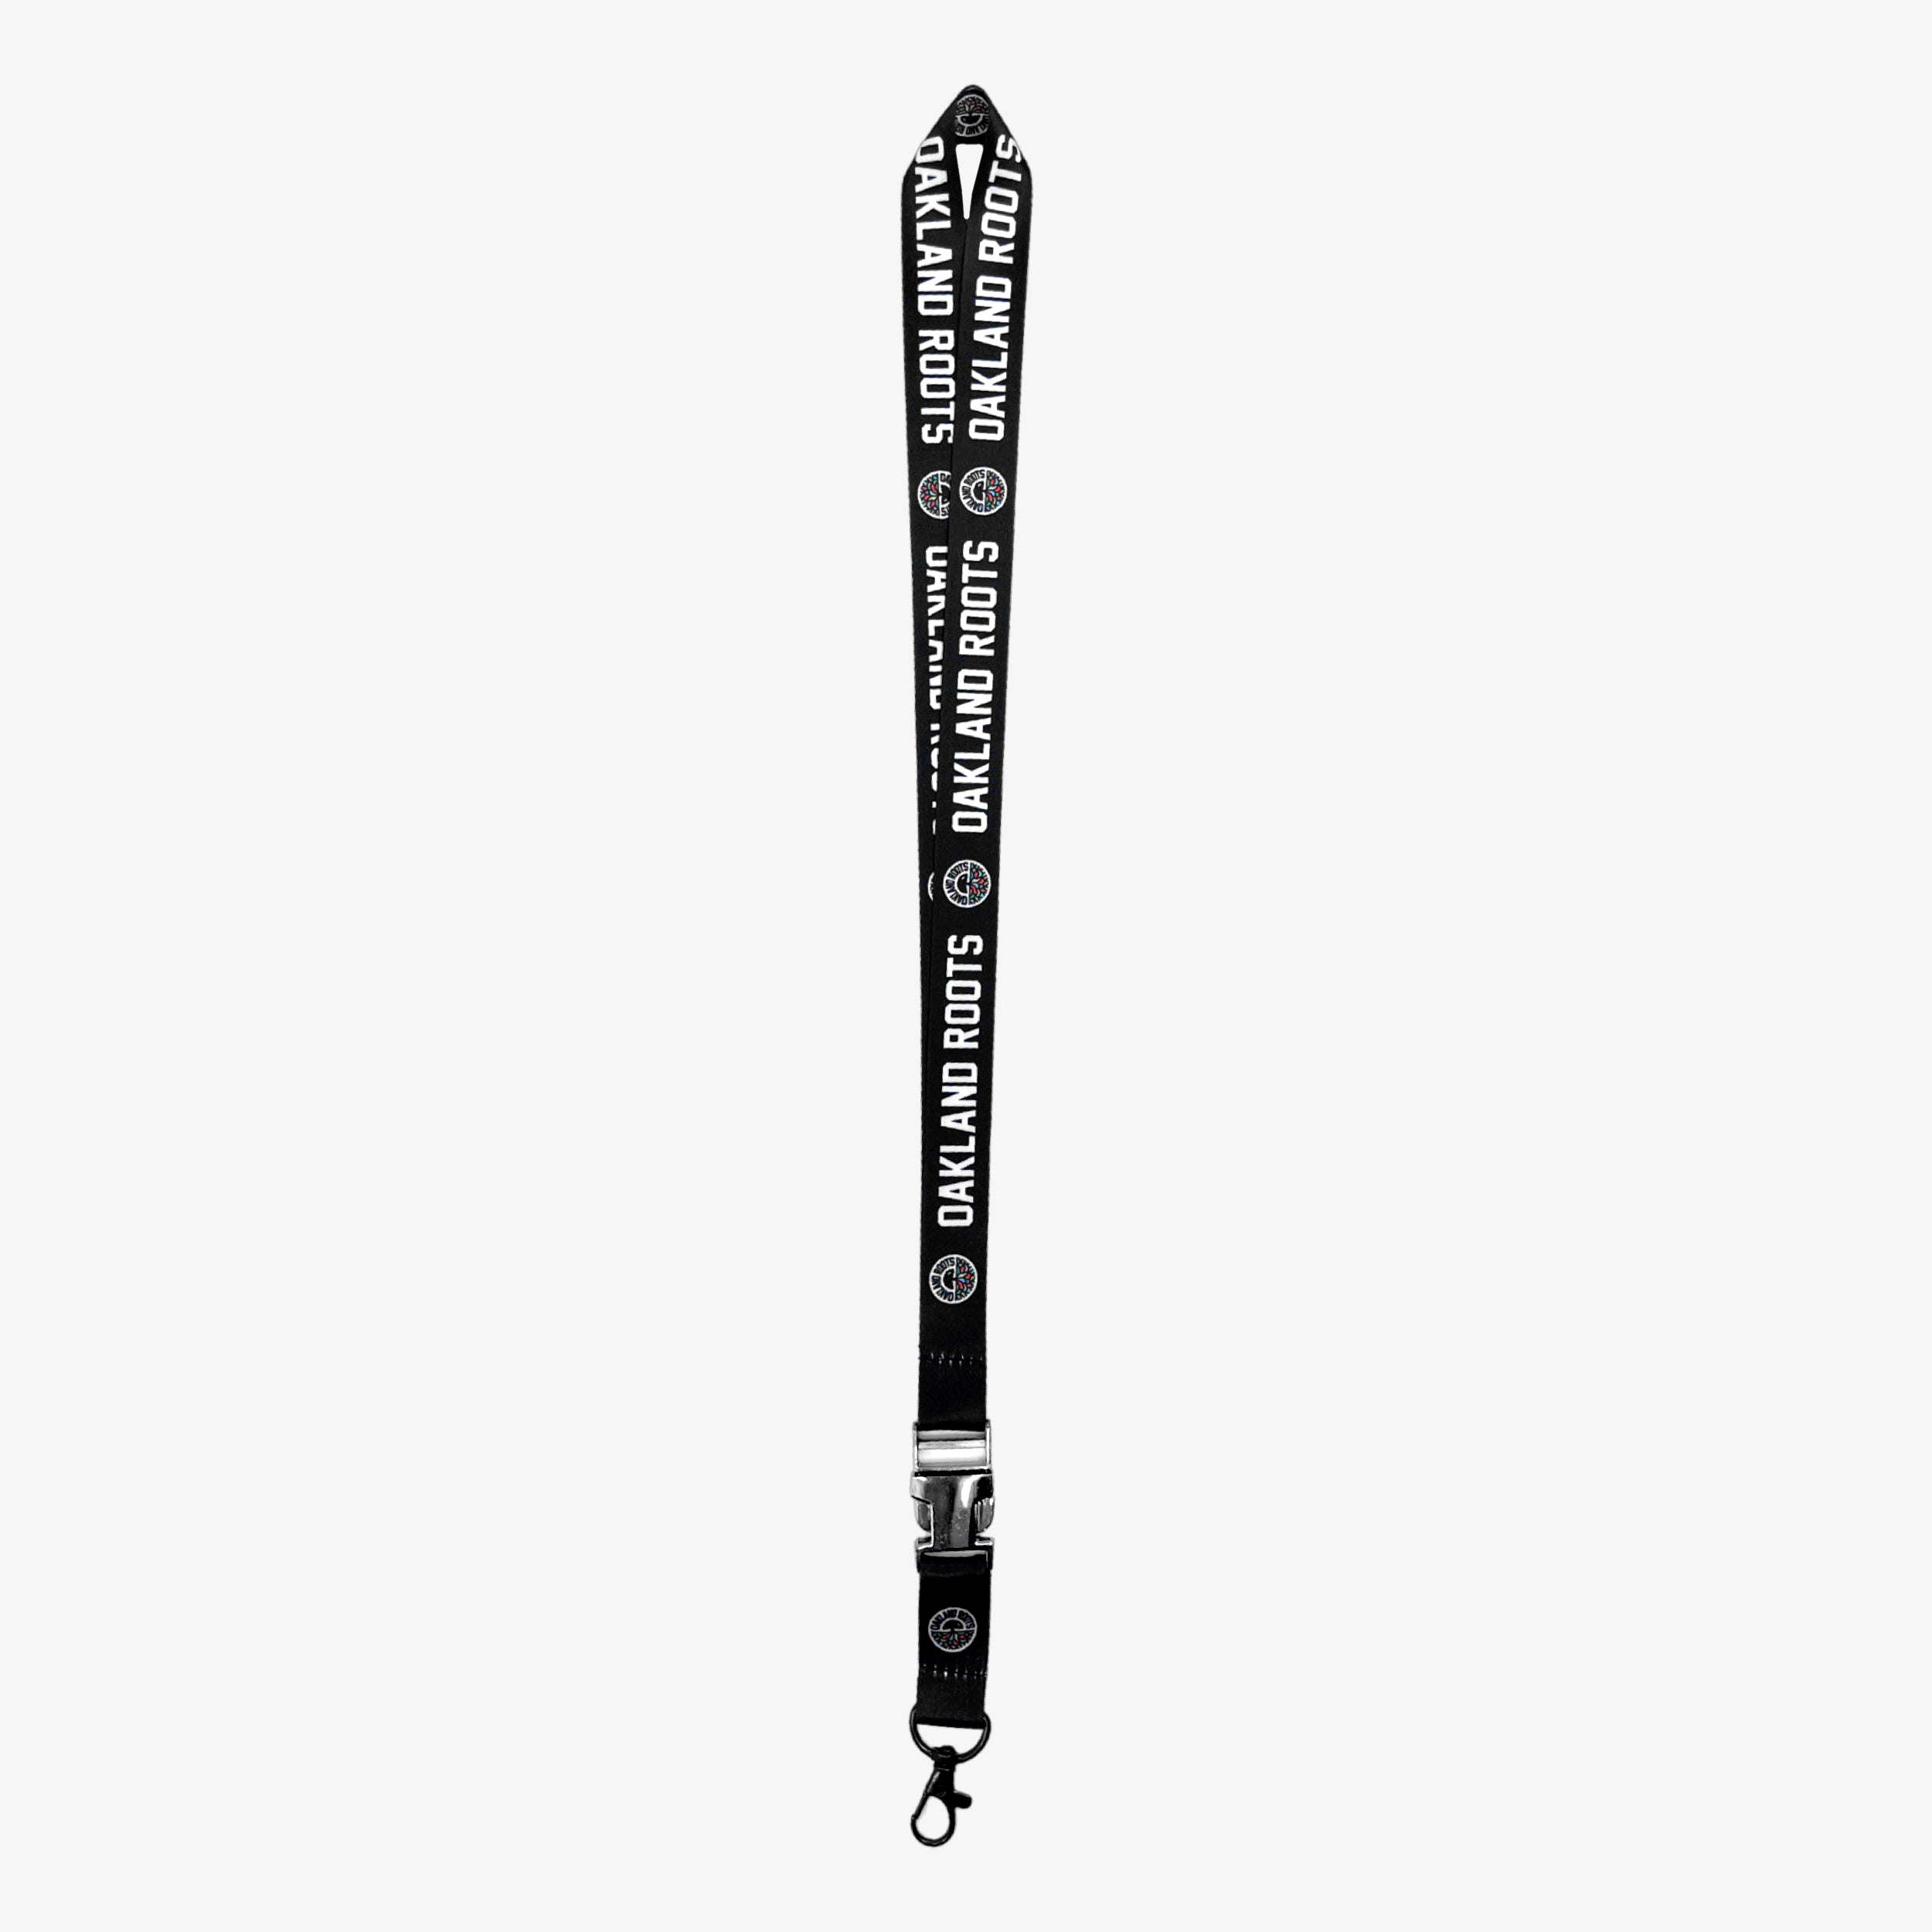 Black lanyard with white Roots SC word mark and color circle logo on repeat with a detachable clip.